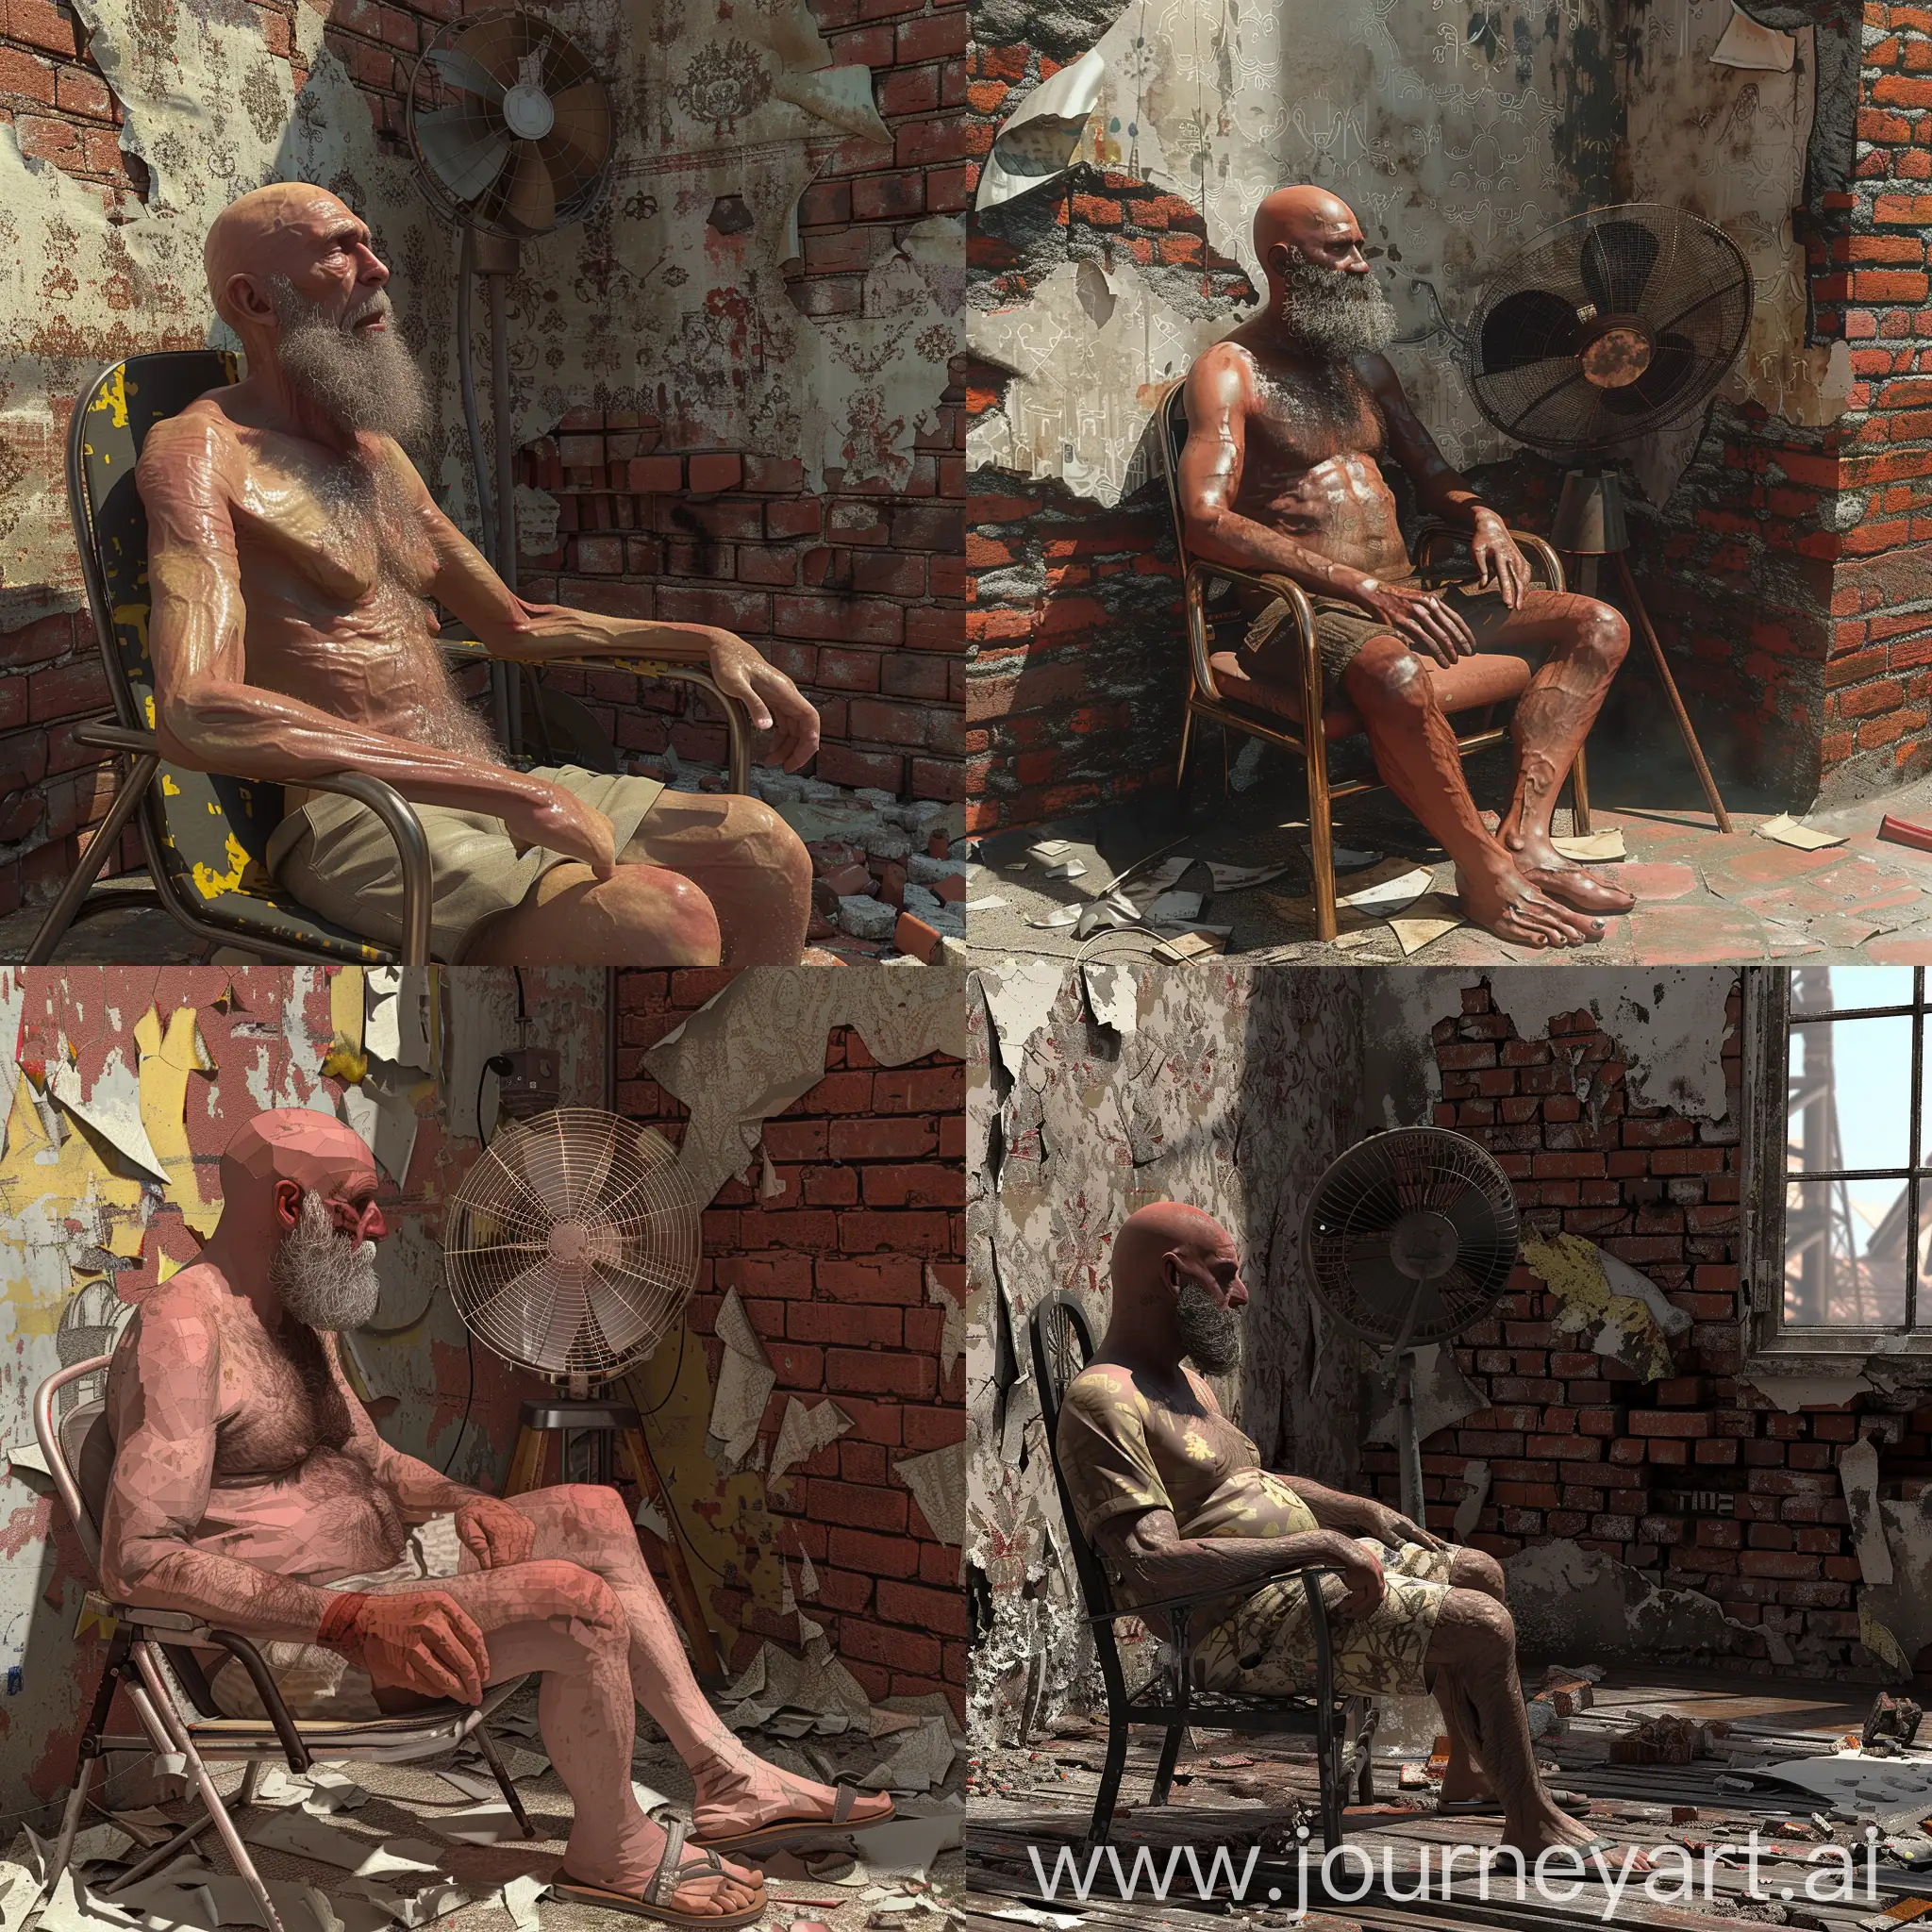 A bald bearded 55-year-old man in a brick slum sits in a chair next to torn wallpaper and cools off under a fan in 2D.